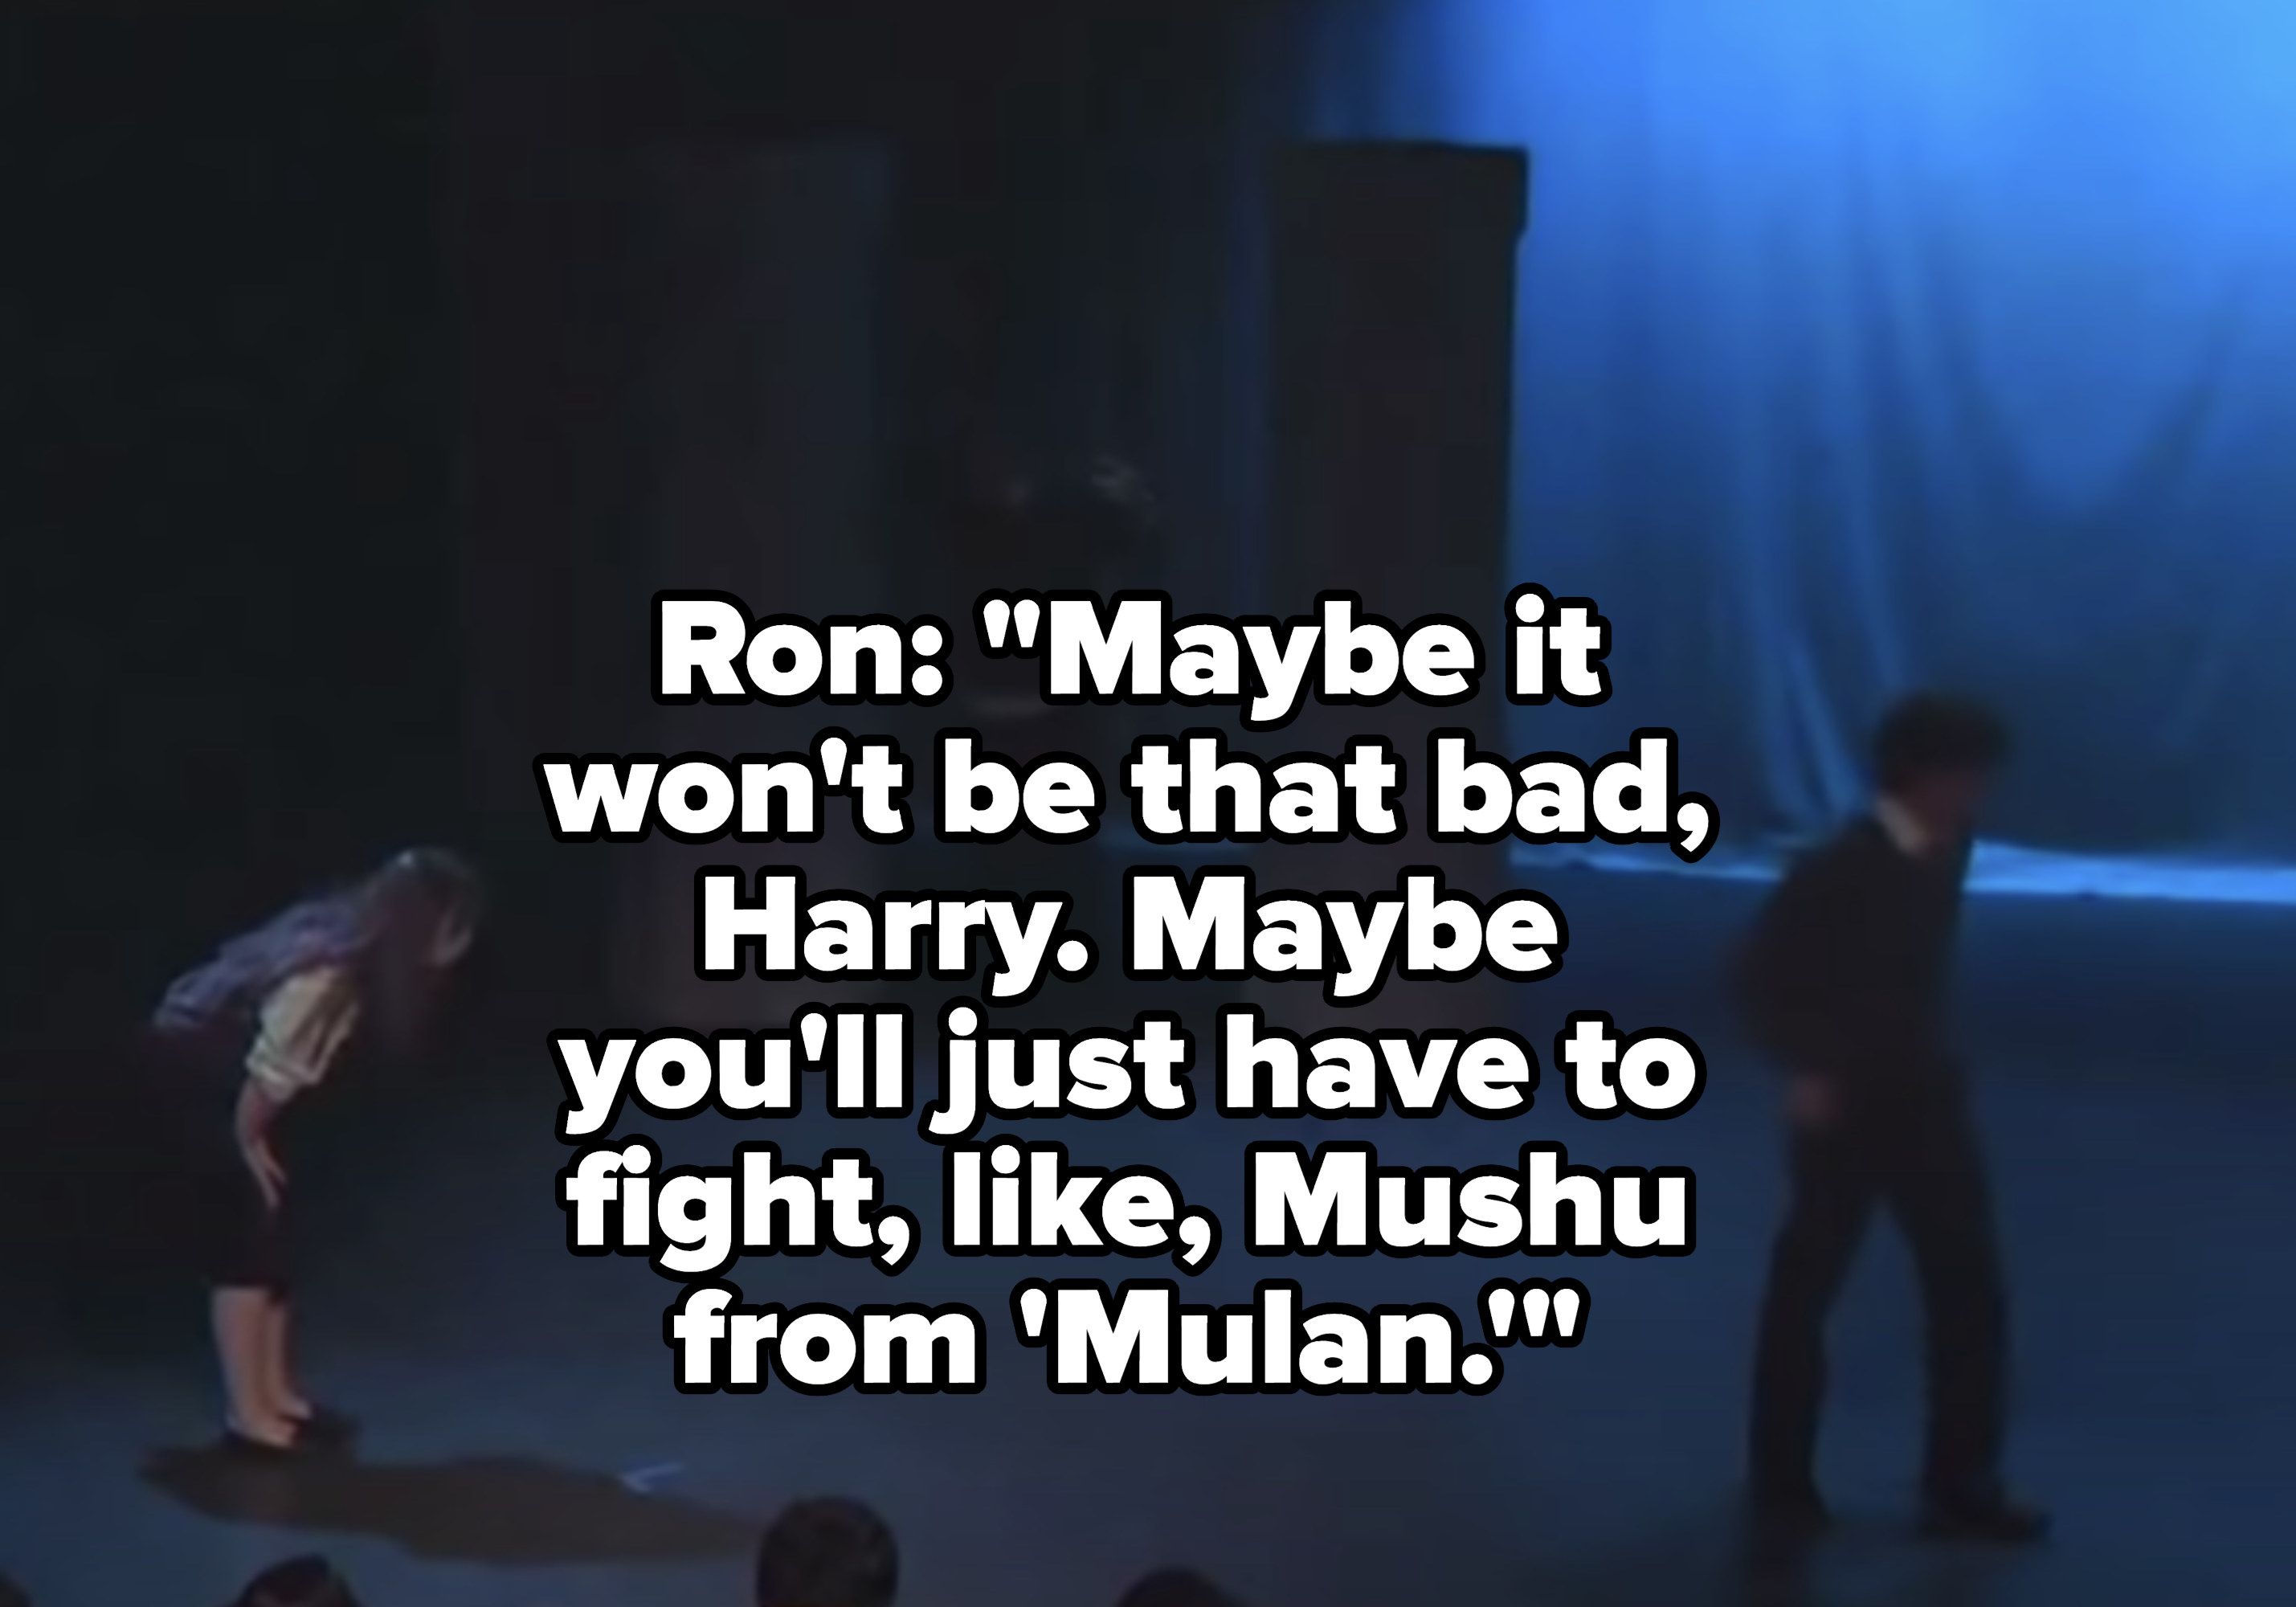 Ron: &quot;Maybe it won&#x27;t be that bad, Harry. Maybe you&#x27;ll just have to fight, like, Mushu from &#x27;Mulan&#x27;&quot;